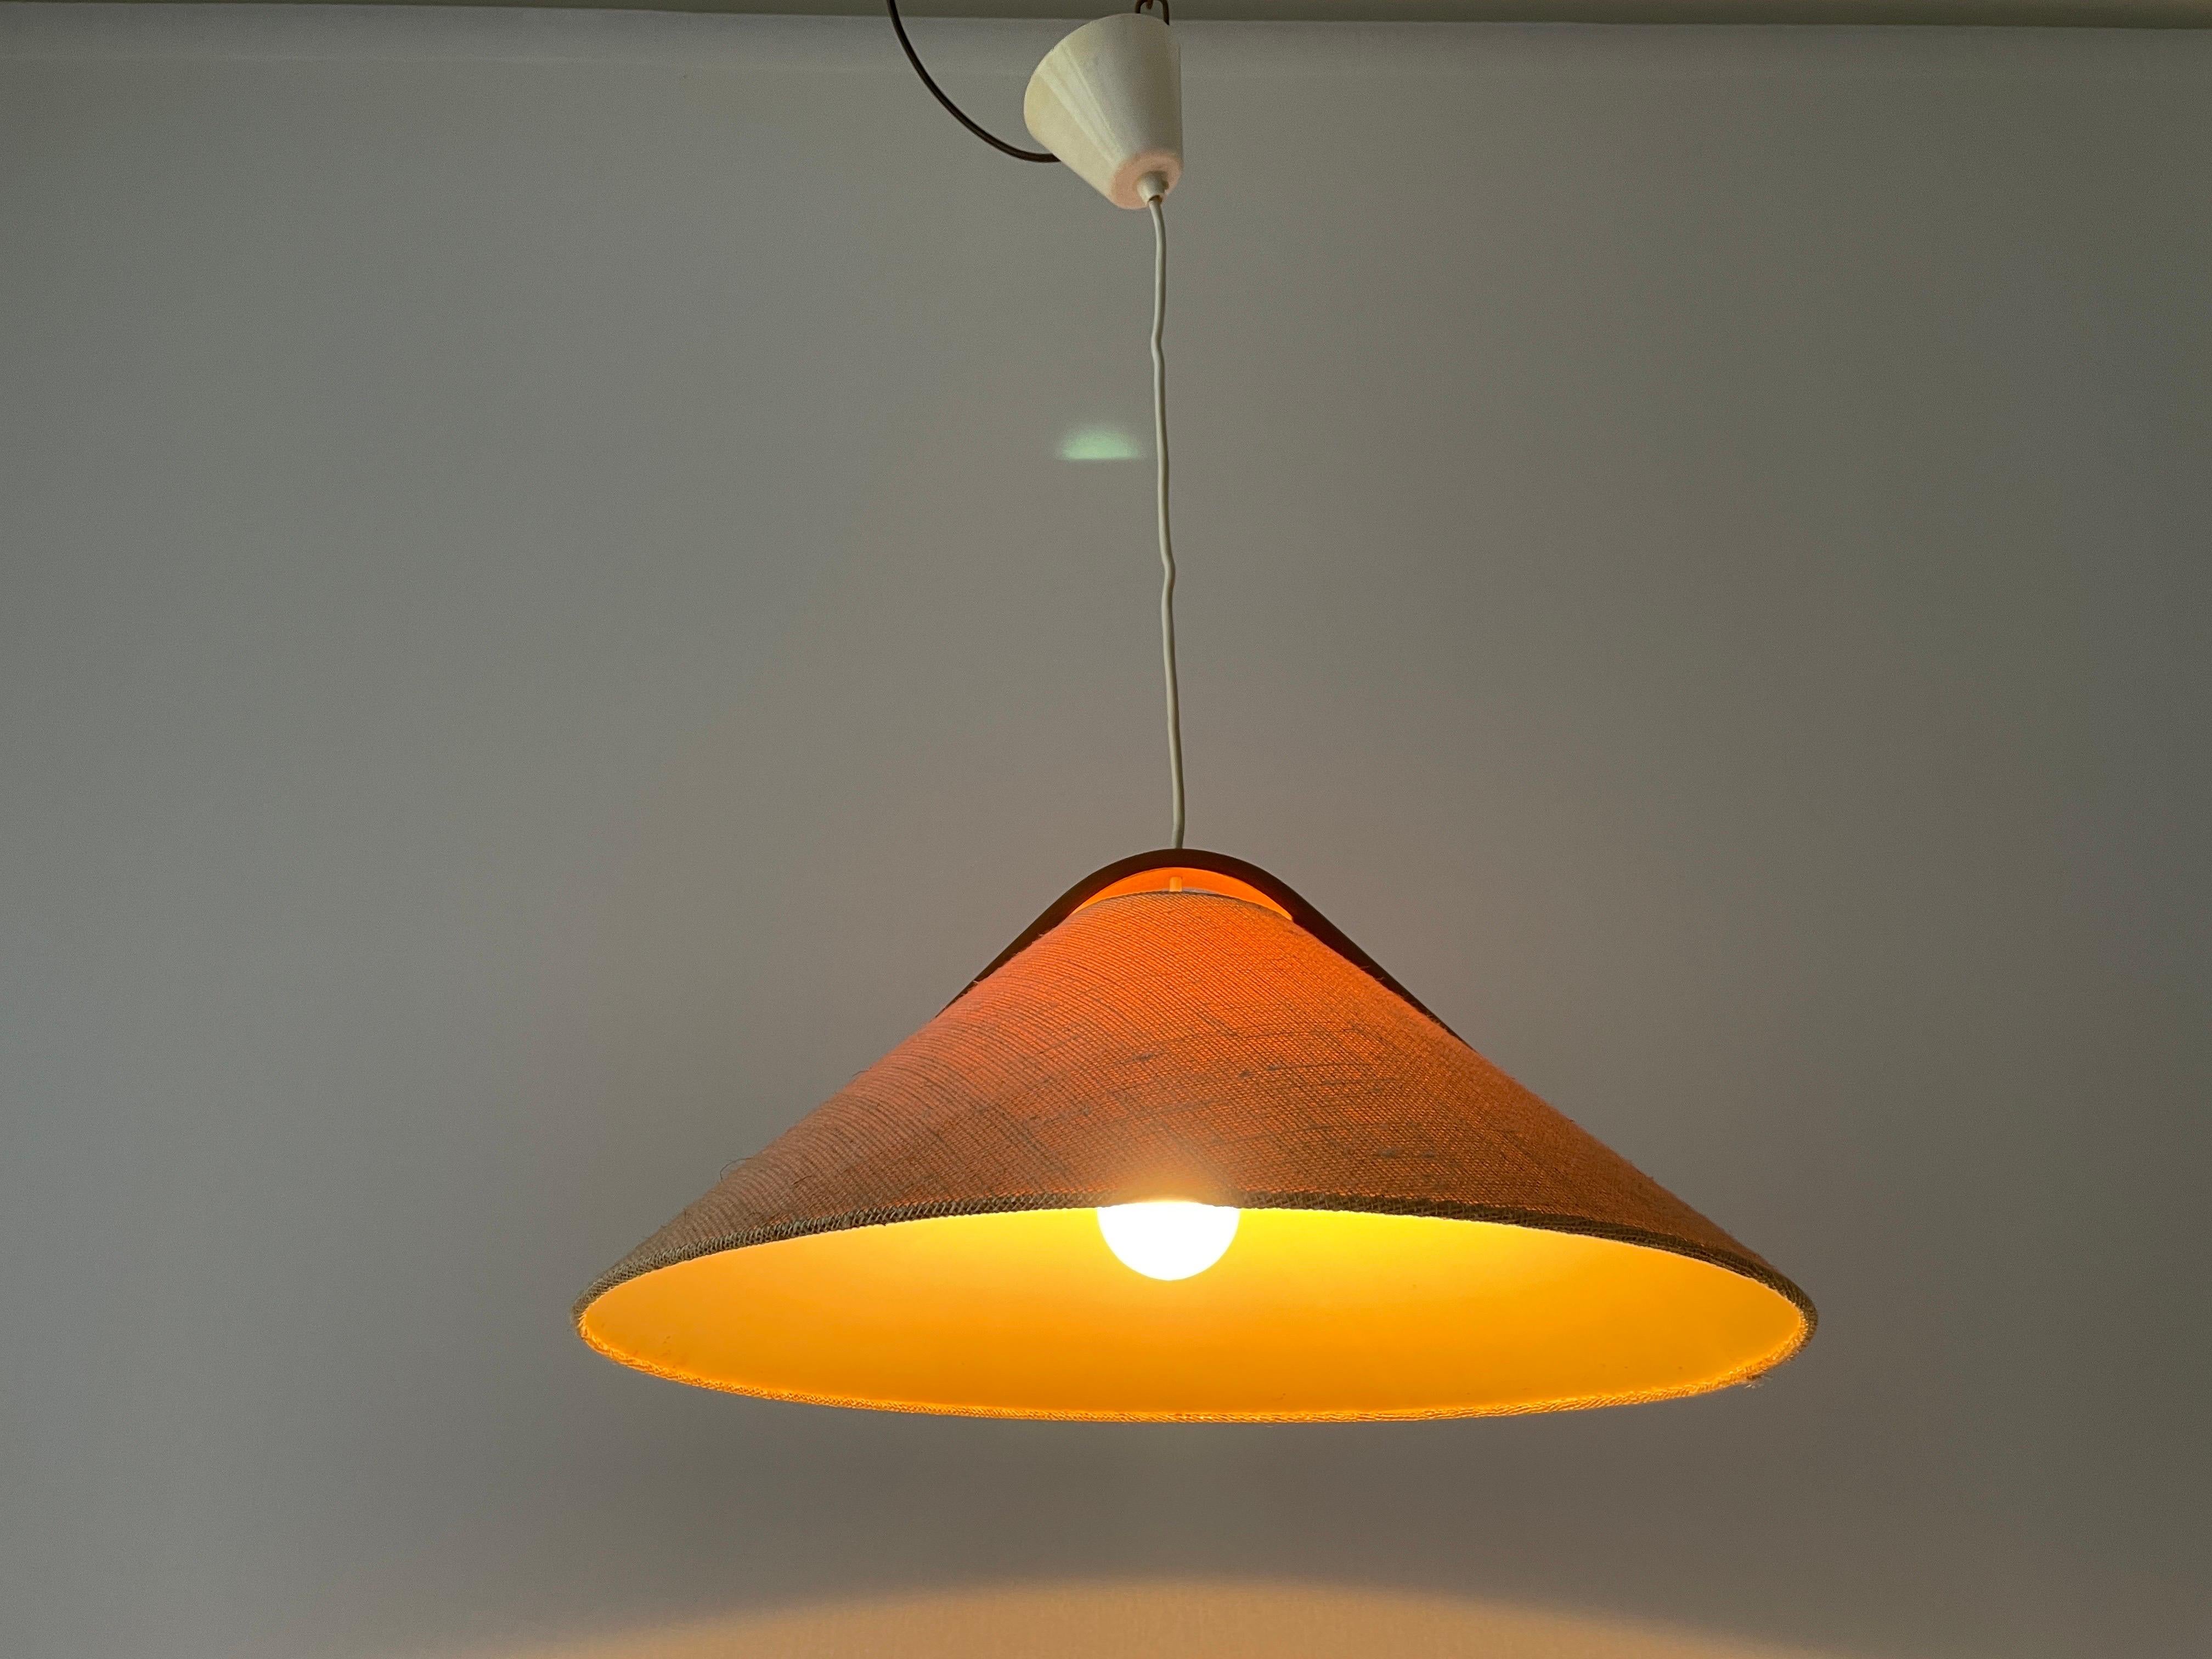 Conic Design Fabric Pendant Lamp with Teak Detail, 1960s, Germany For Sale 10